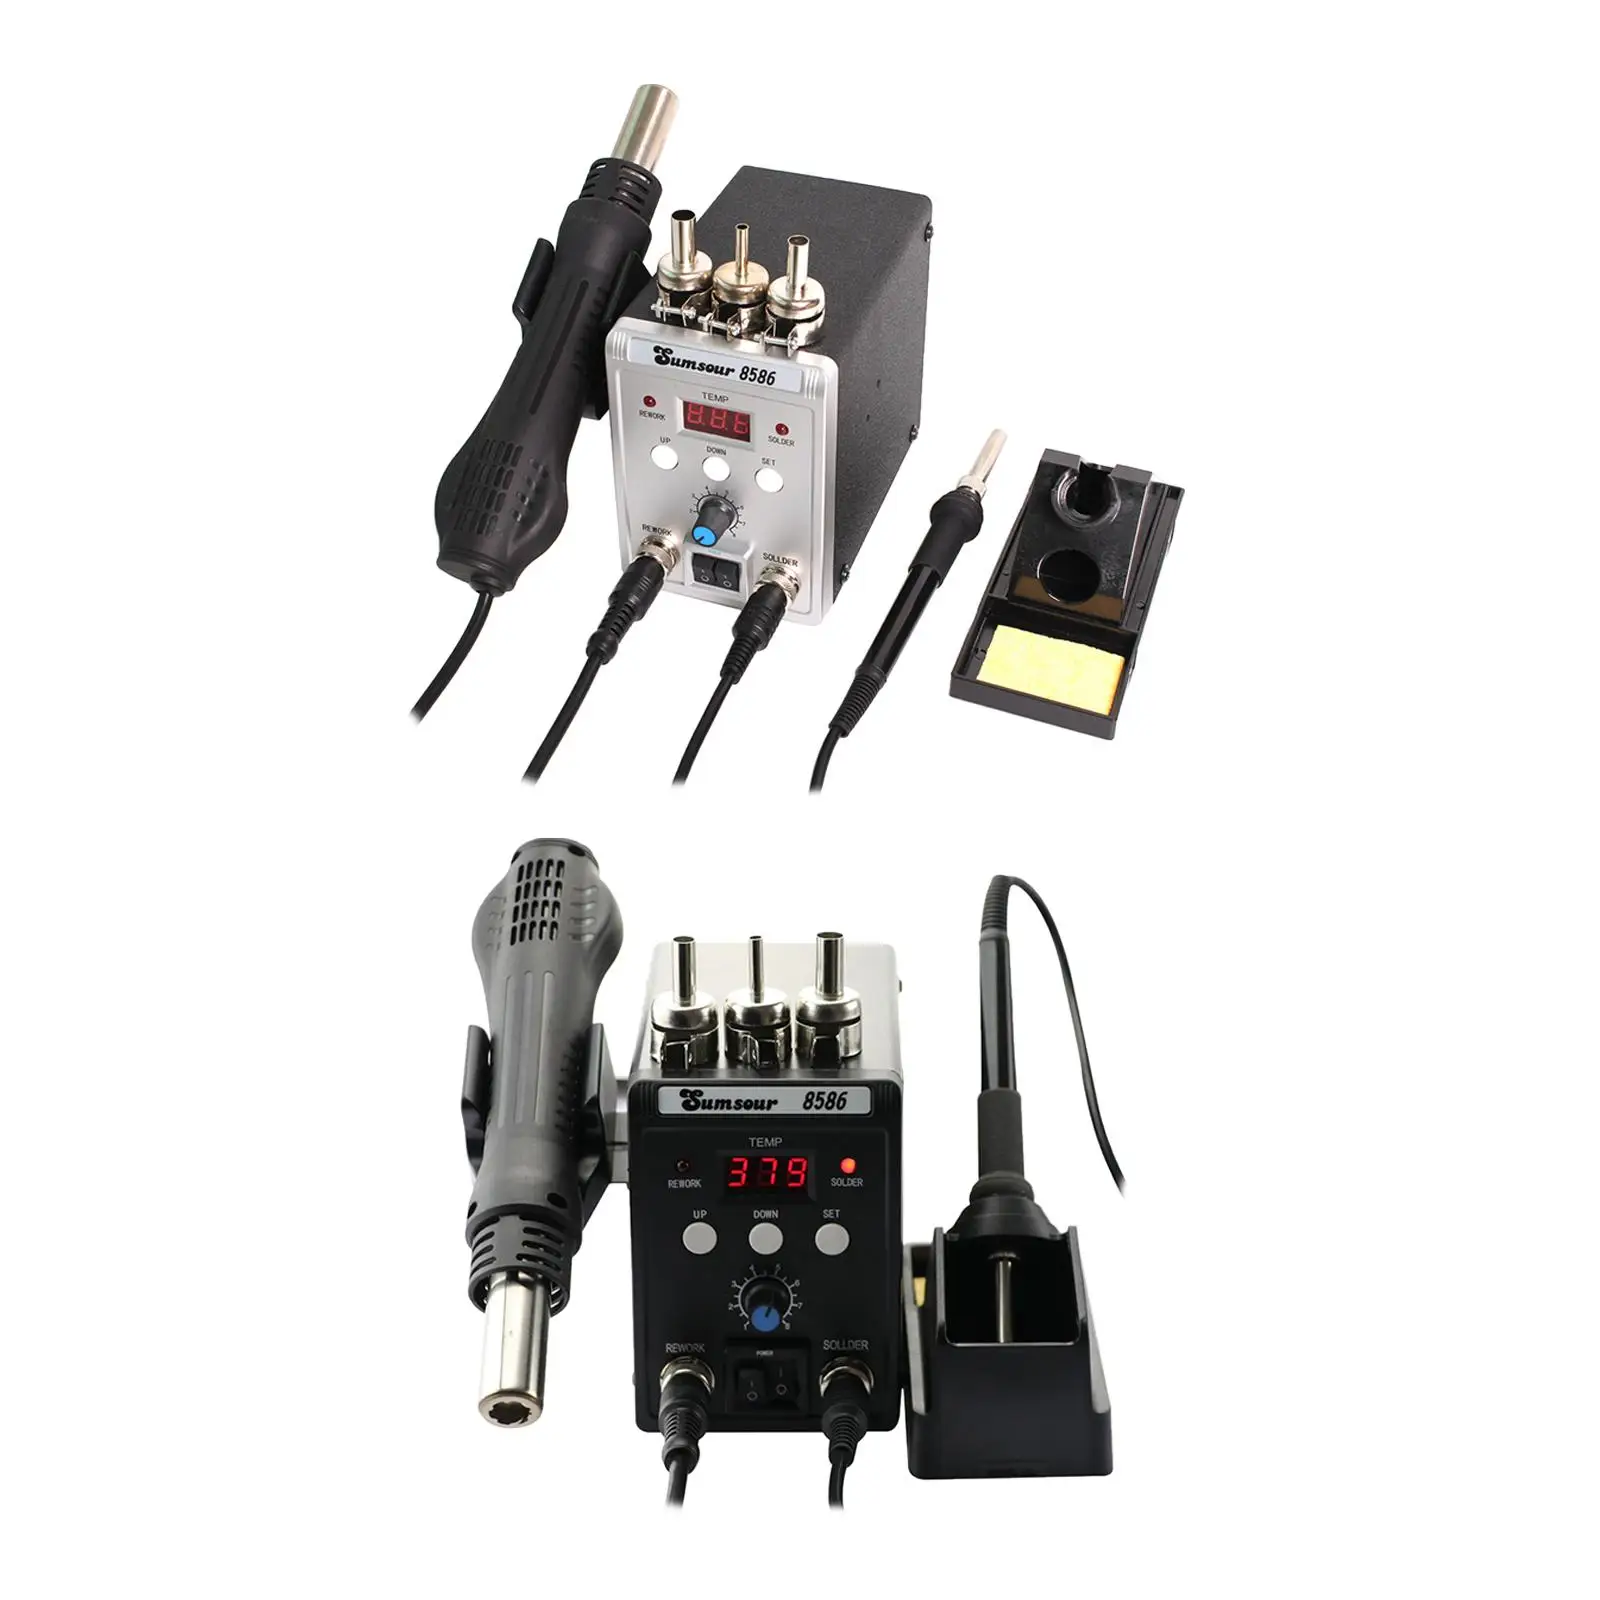 60W Soldering Station Adjust Temperature with Metal Holder Hot Air Rework Electric Welding Tool for Maintenance Home Appliance